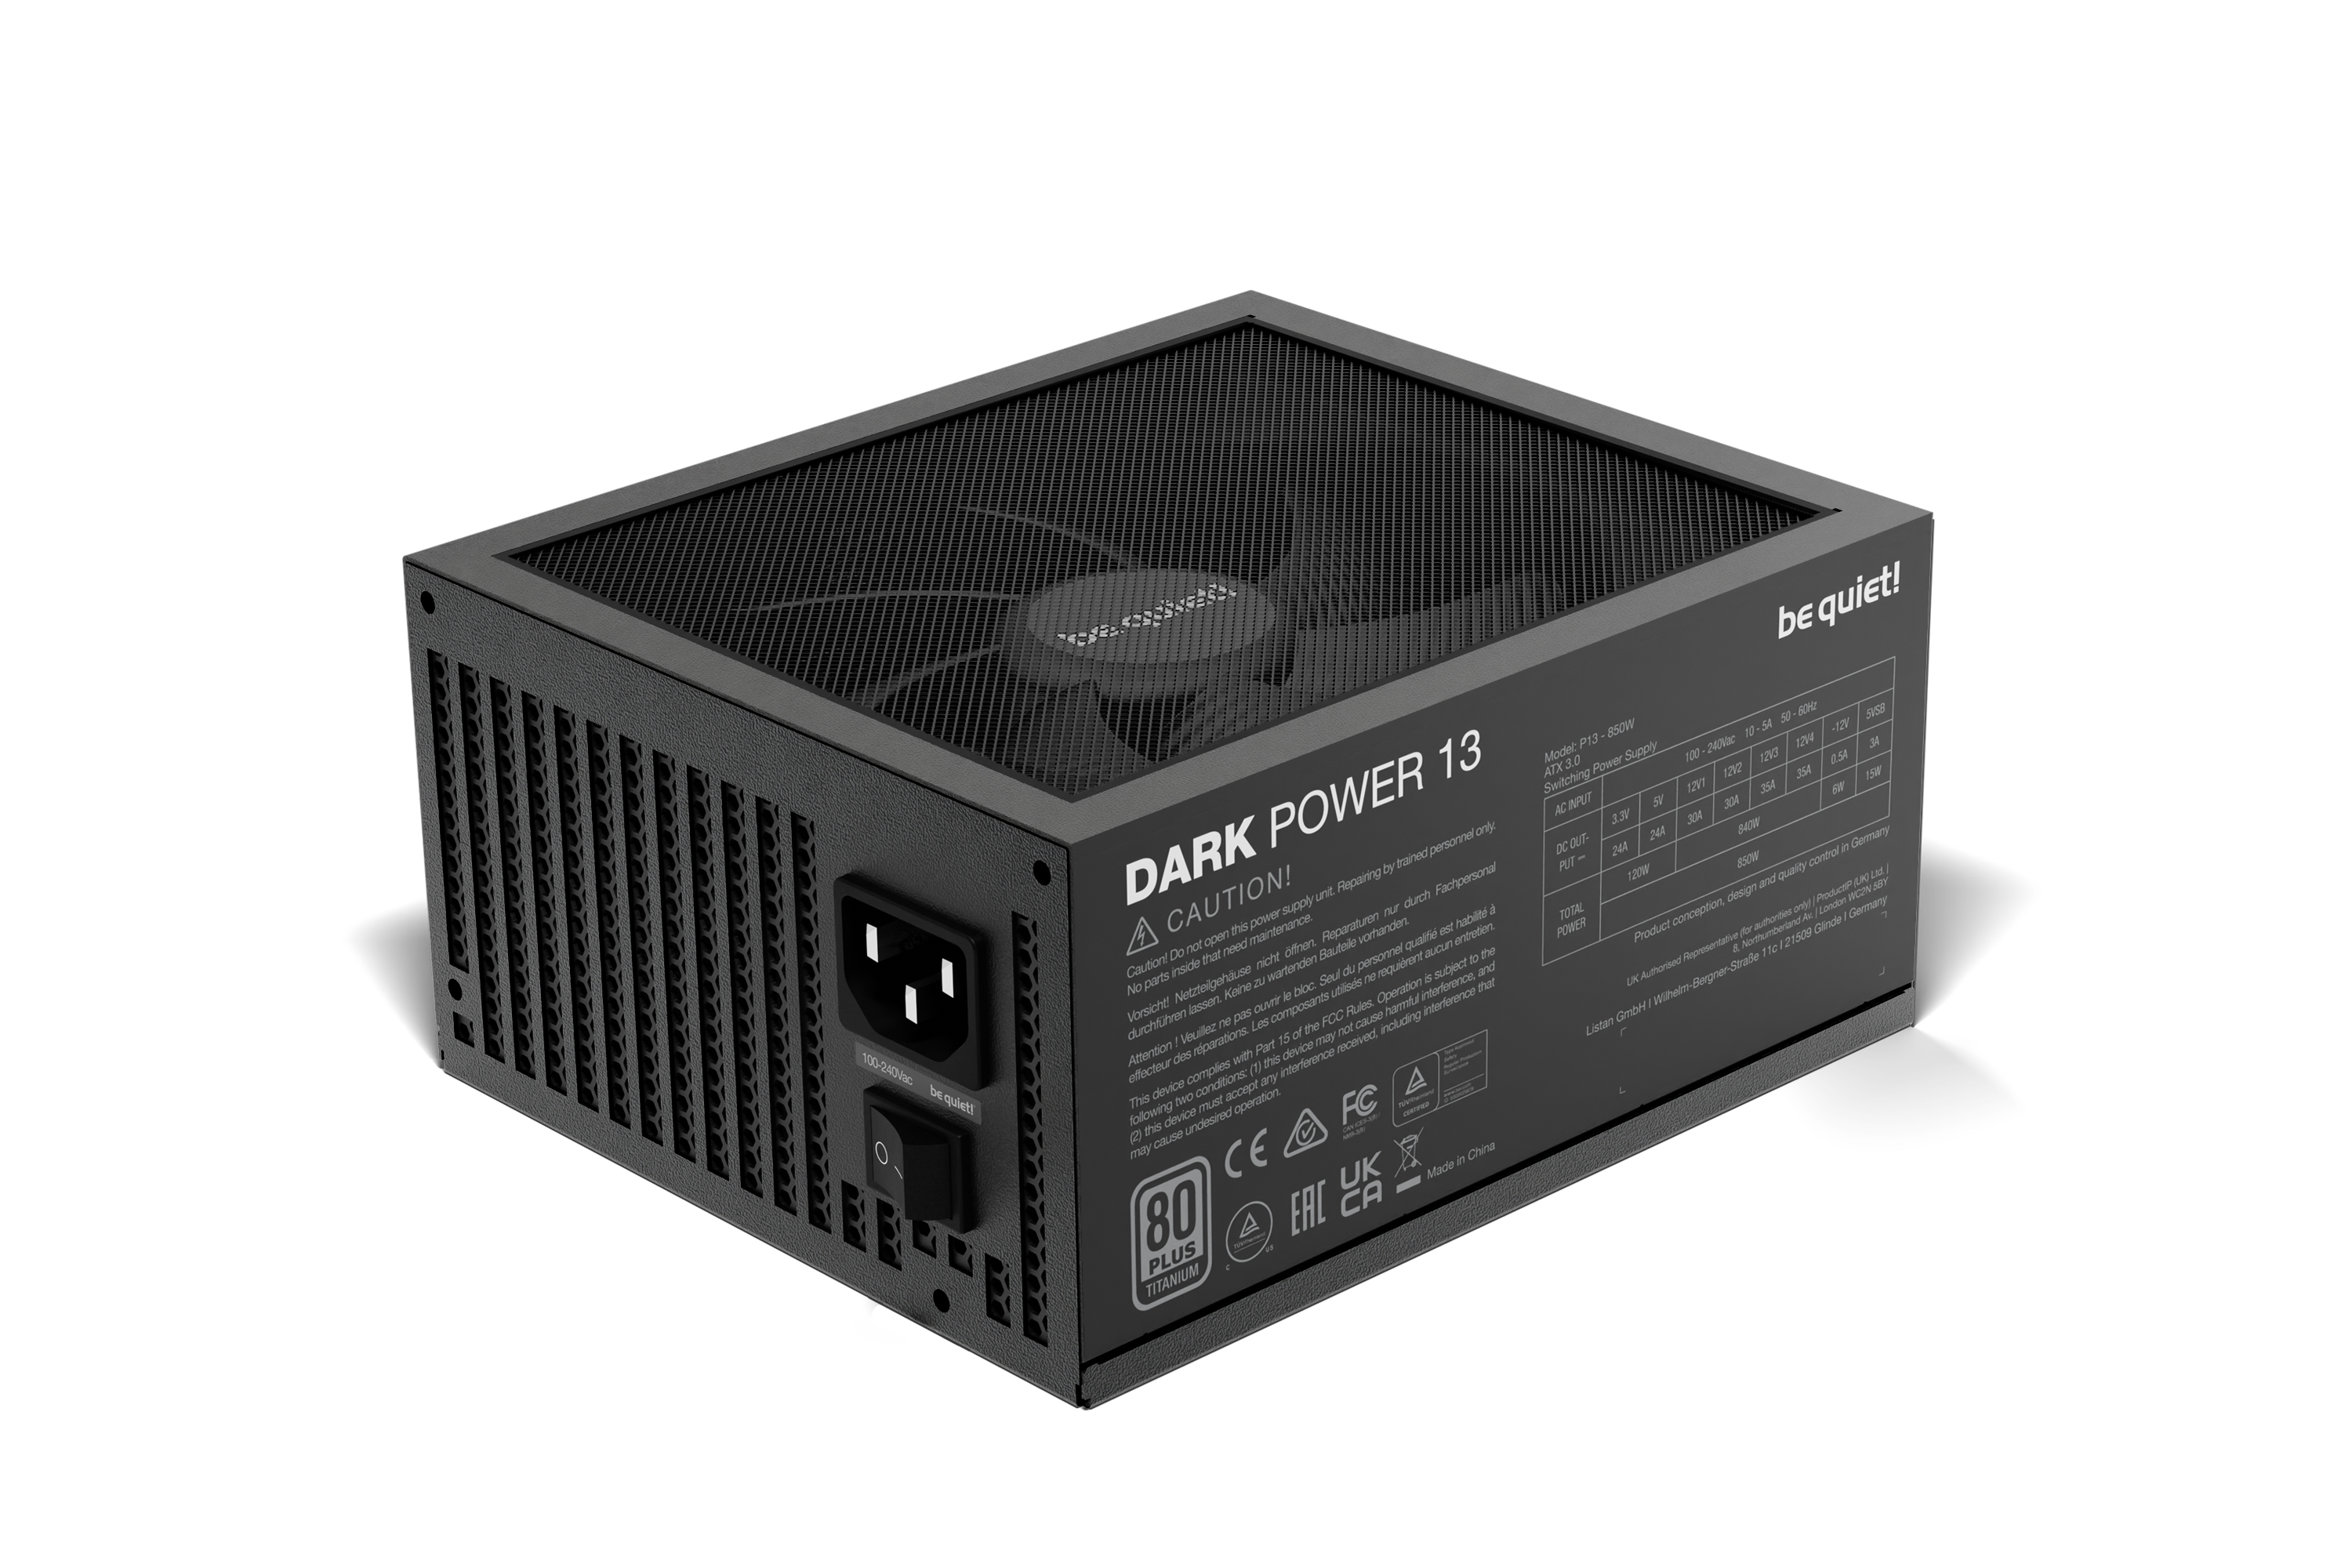 be quiet! Dark Power 13 850W, ATX3.0, 80+Titanium, 1x 12VHPWR (600W), ErP, Energy Star 8 APFC, Sleeved, 4xPCI-Ex(6+2), 12xSATA, 3xPATA, Full Cable Management, Switchable 4 or 1 Rail, Silent Wings 135